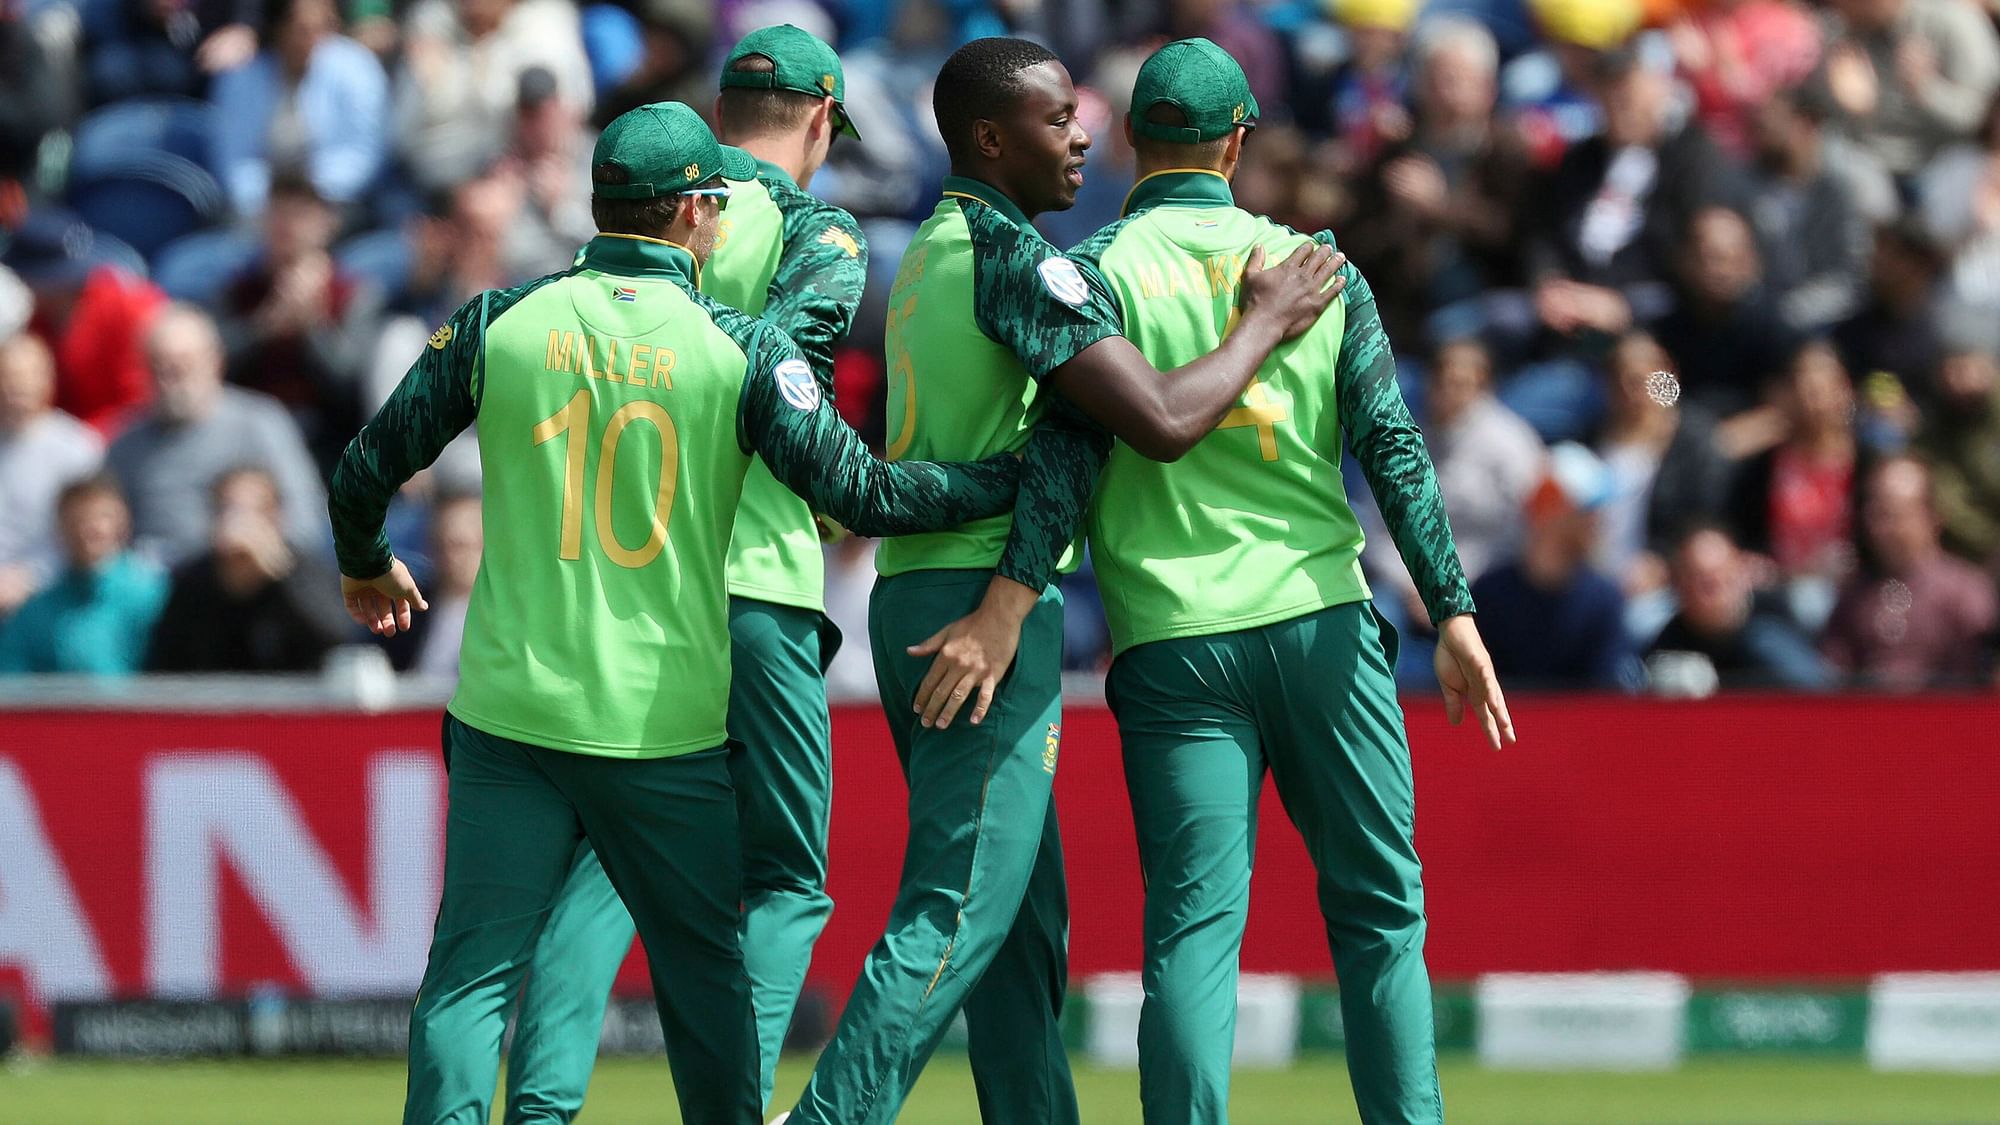 South Africa is level on three points in the bottom half of the table with West Indies, Bangladesh and Pakistan.&nbsp;